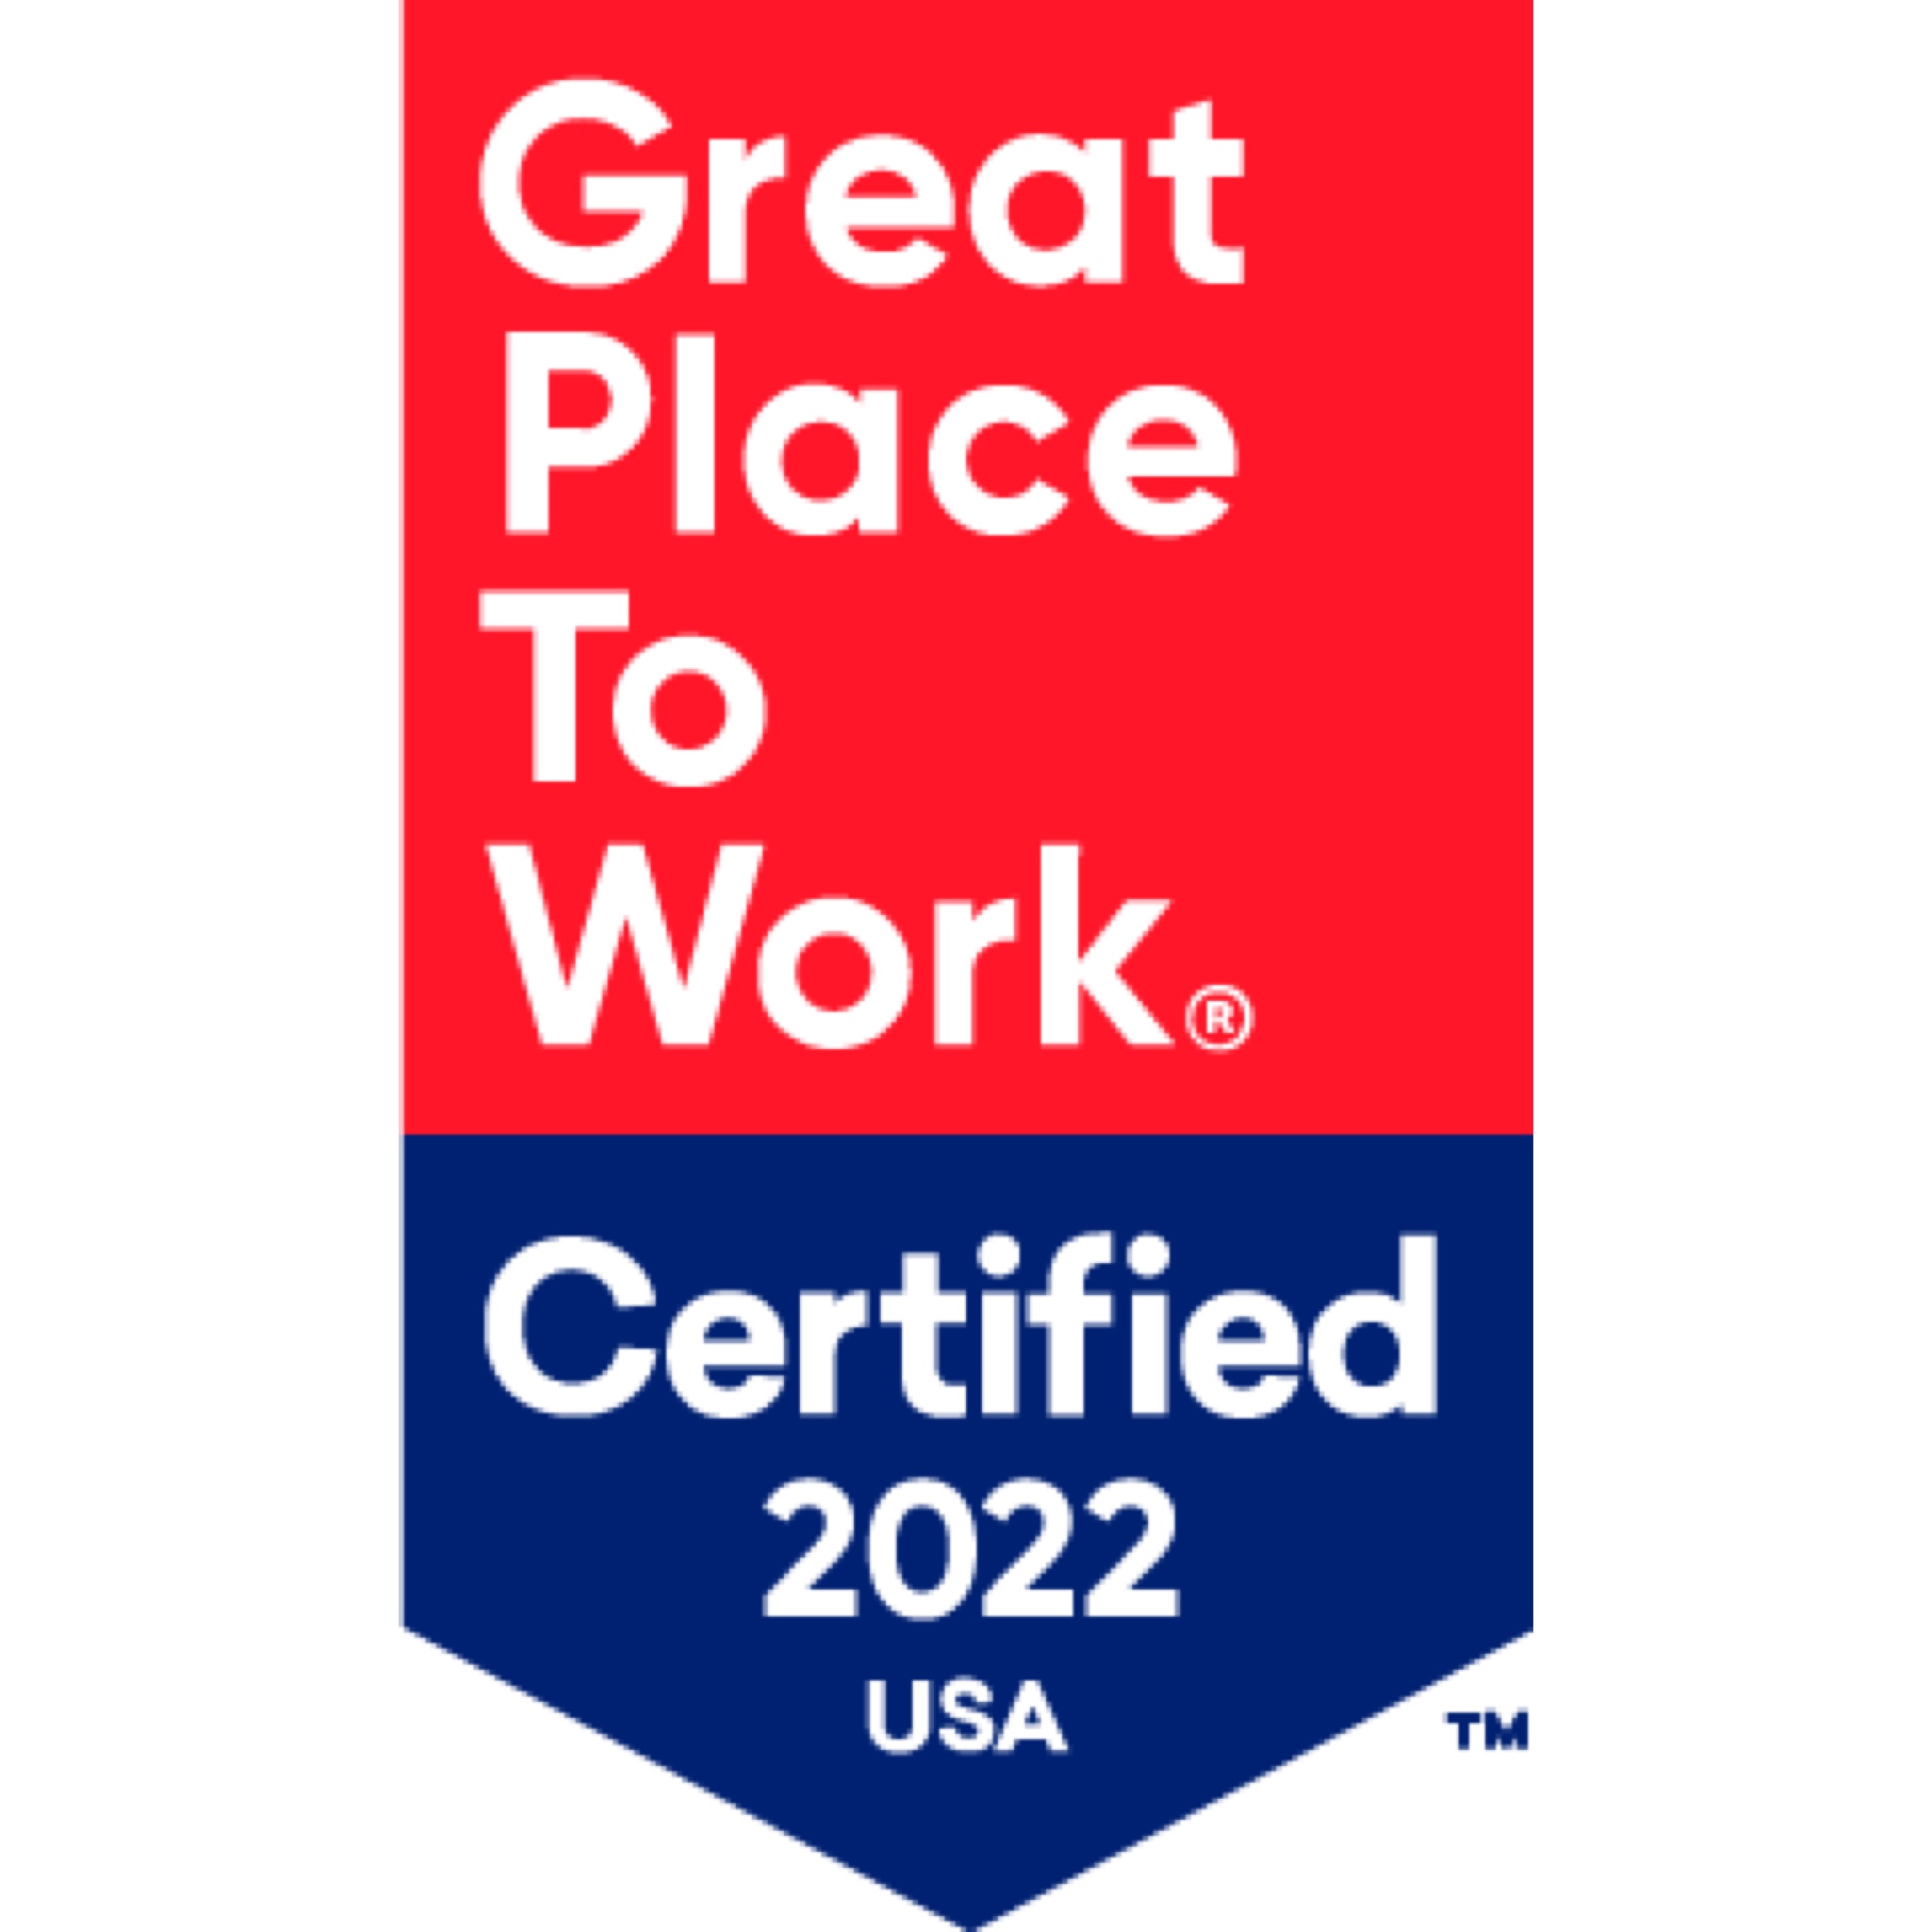 United States : L’agence Altered State Productions remporte le prix Great Places to Work - Certified 2022 USA